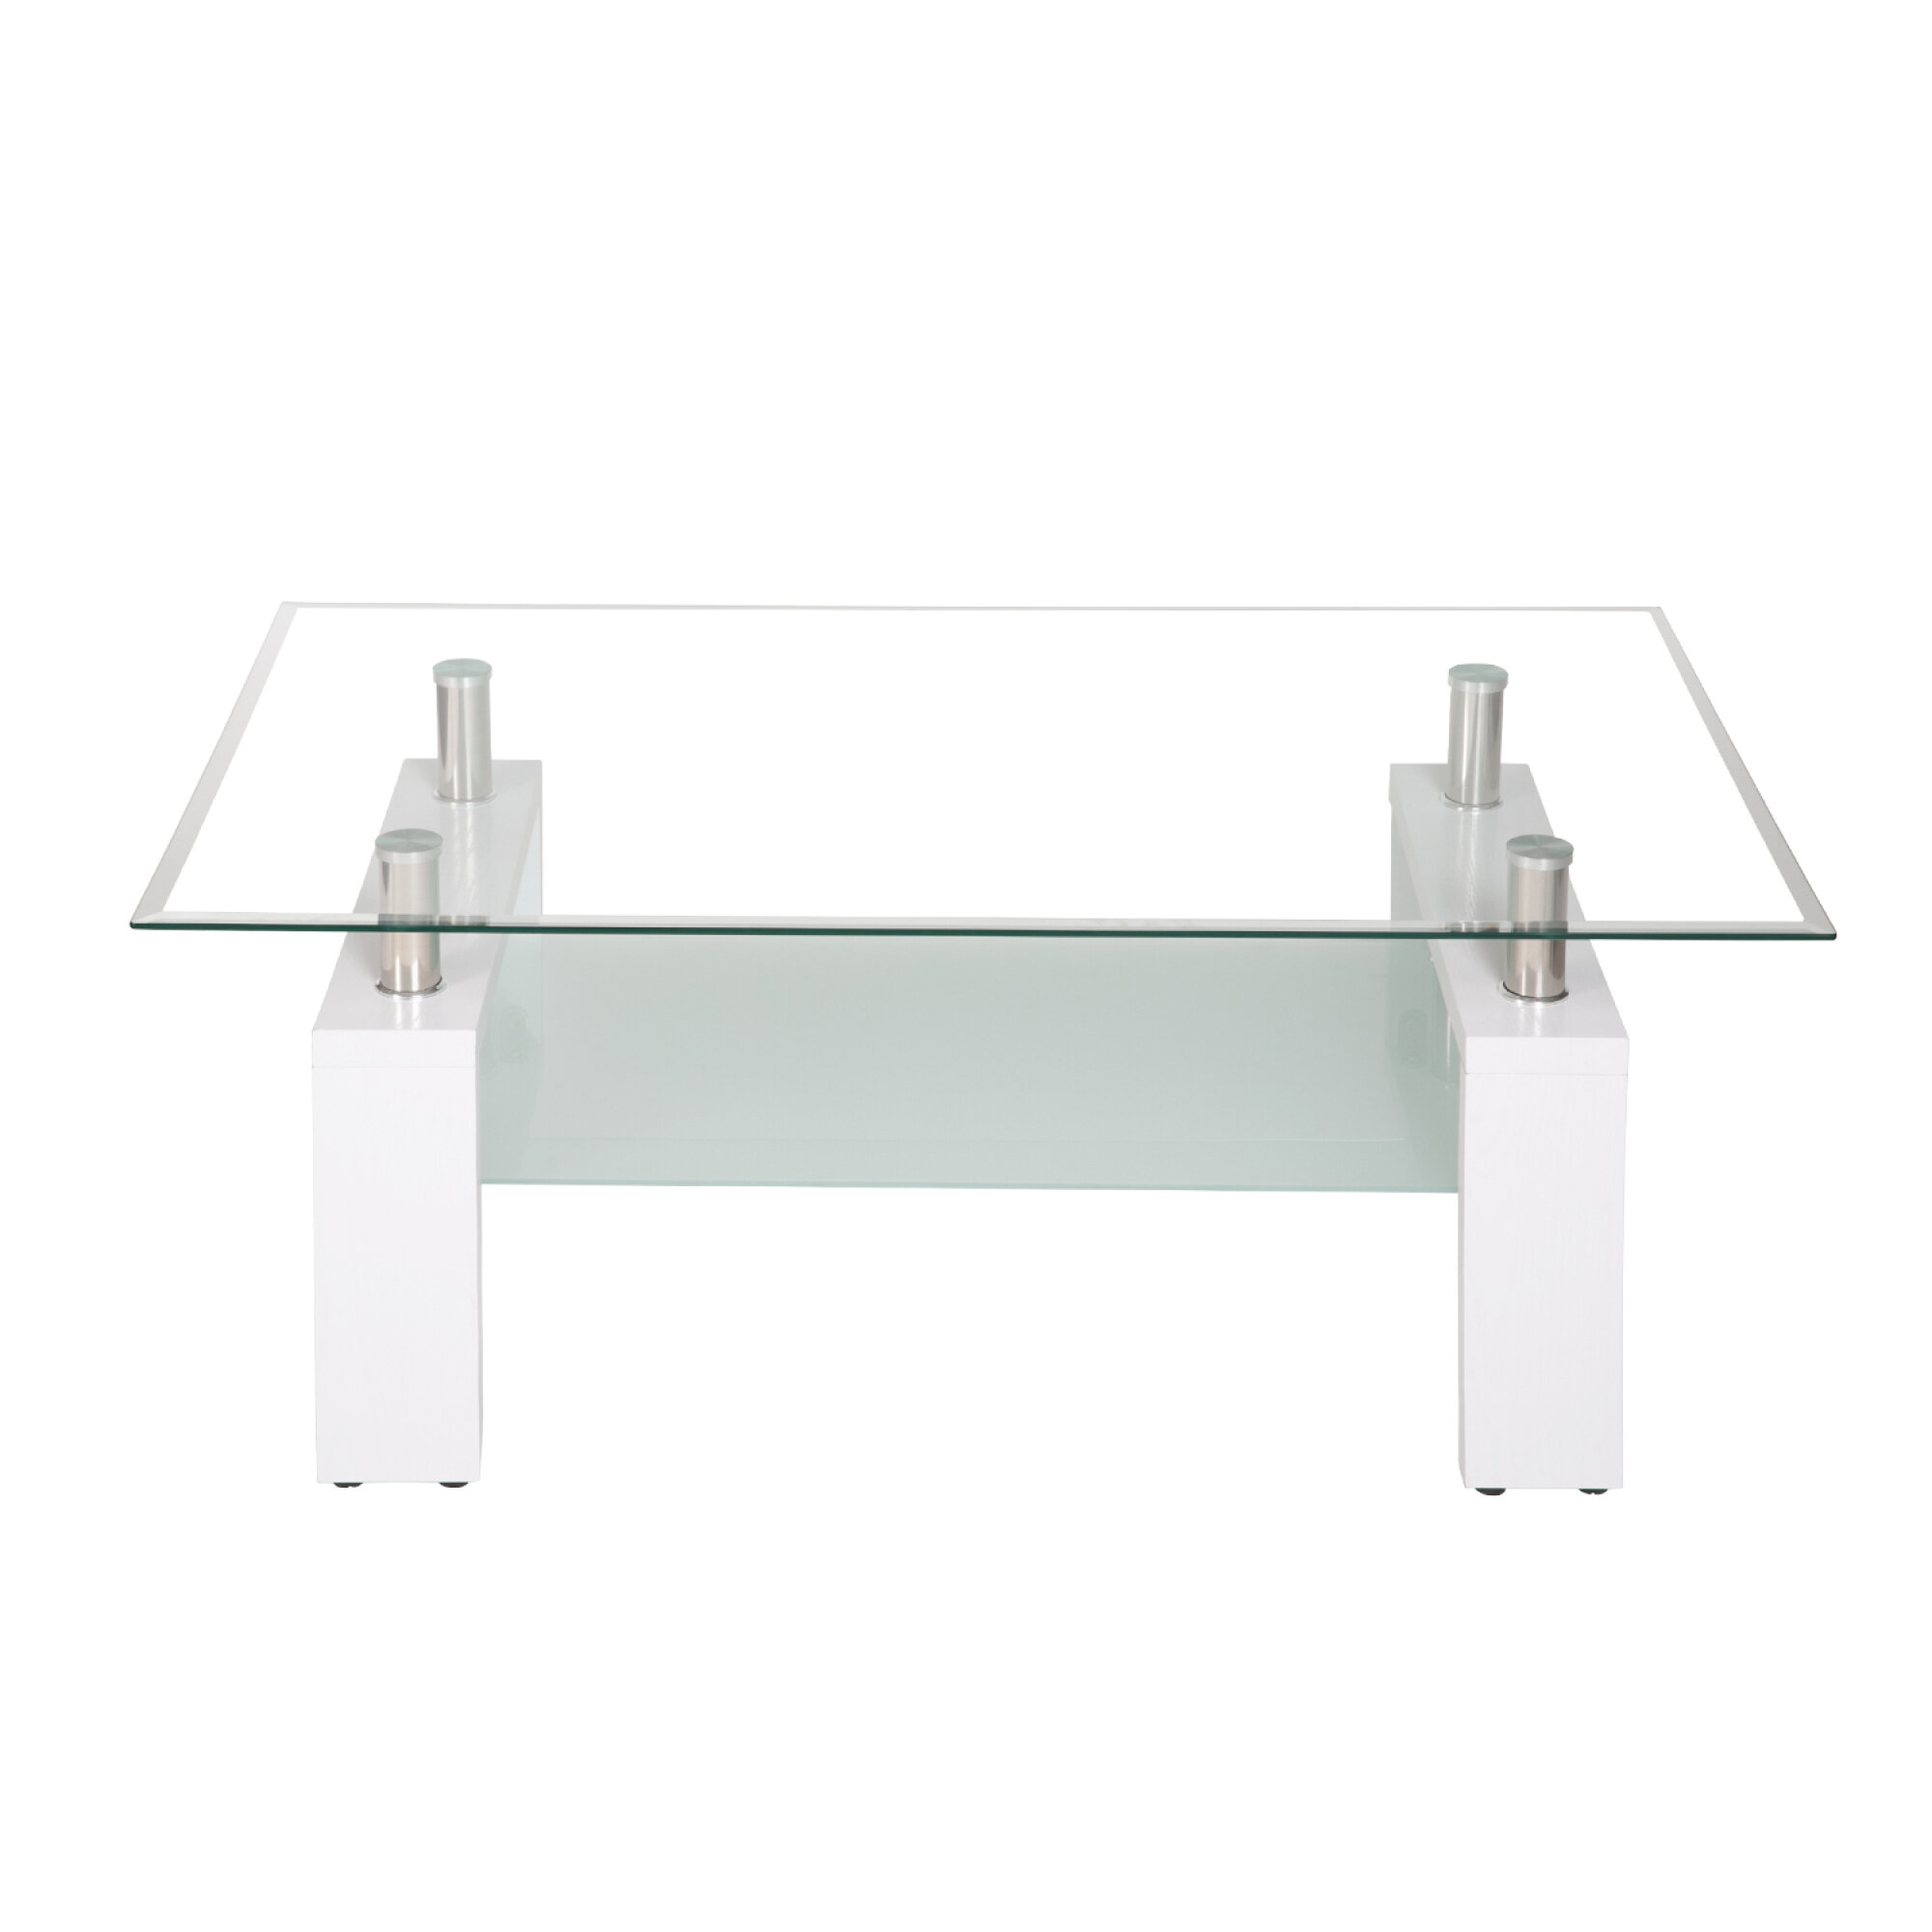 Perspections Tempered Glass Coffee Table Modern Rectangle Tea Table With Lower Storage Shelf And Wood Leg For Living Room Size L 100 X W 60 X H 45 Cm White Clear Wayfair De